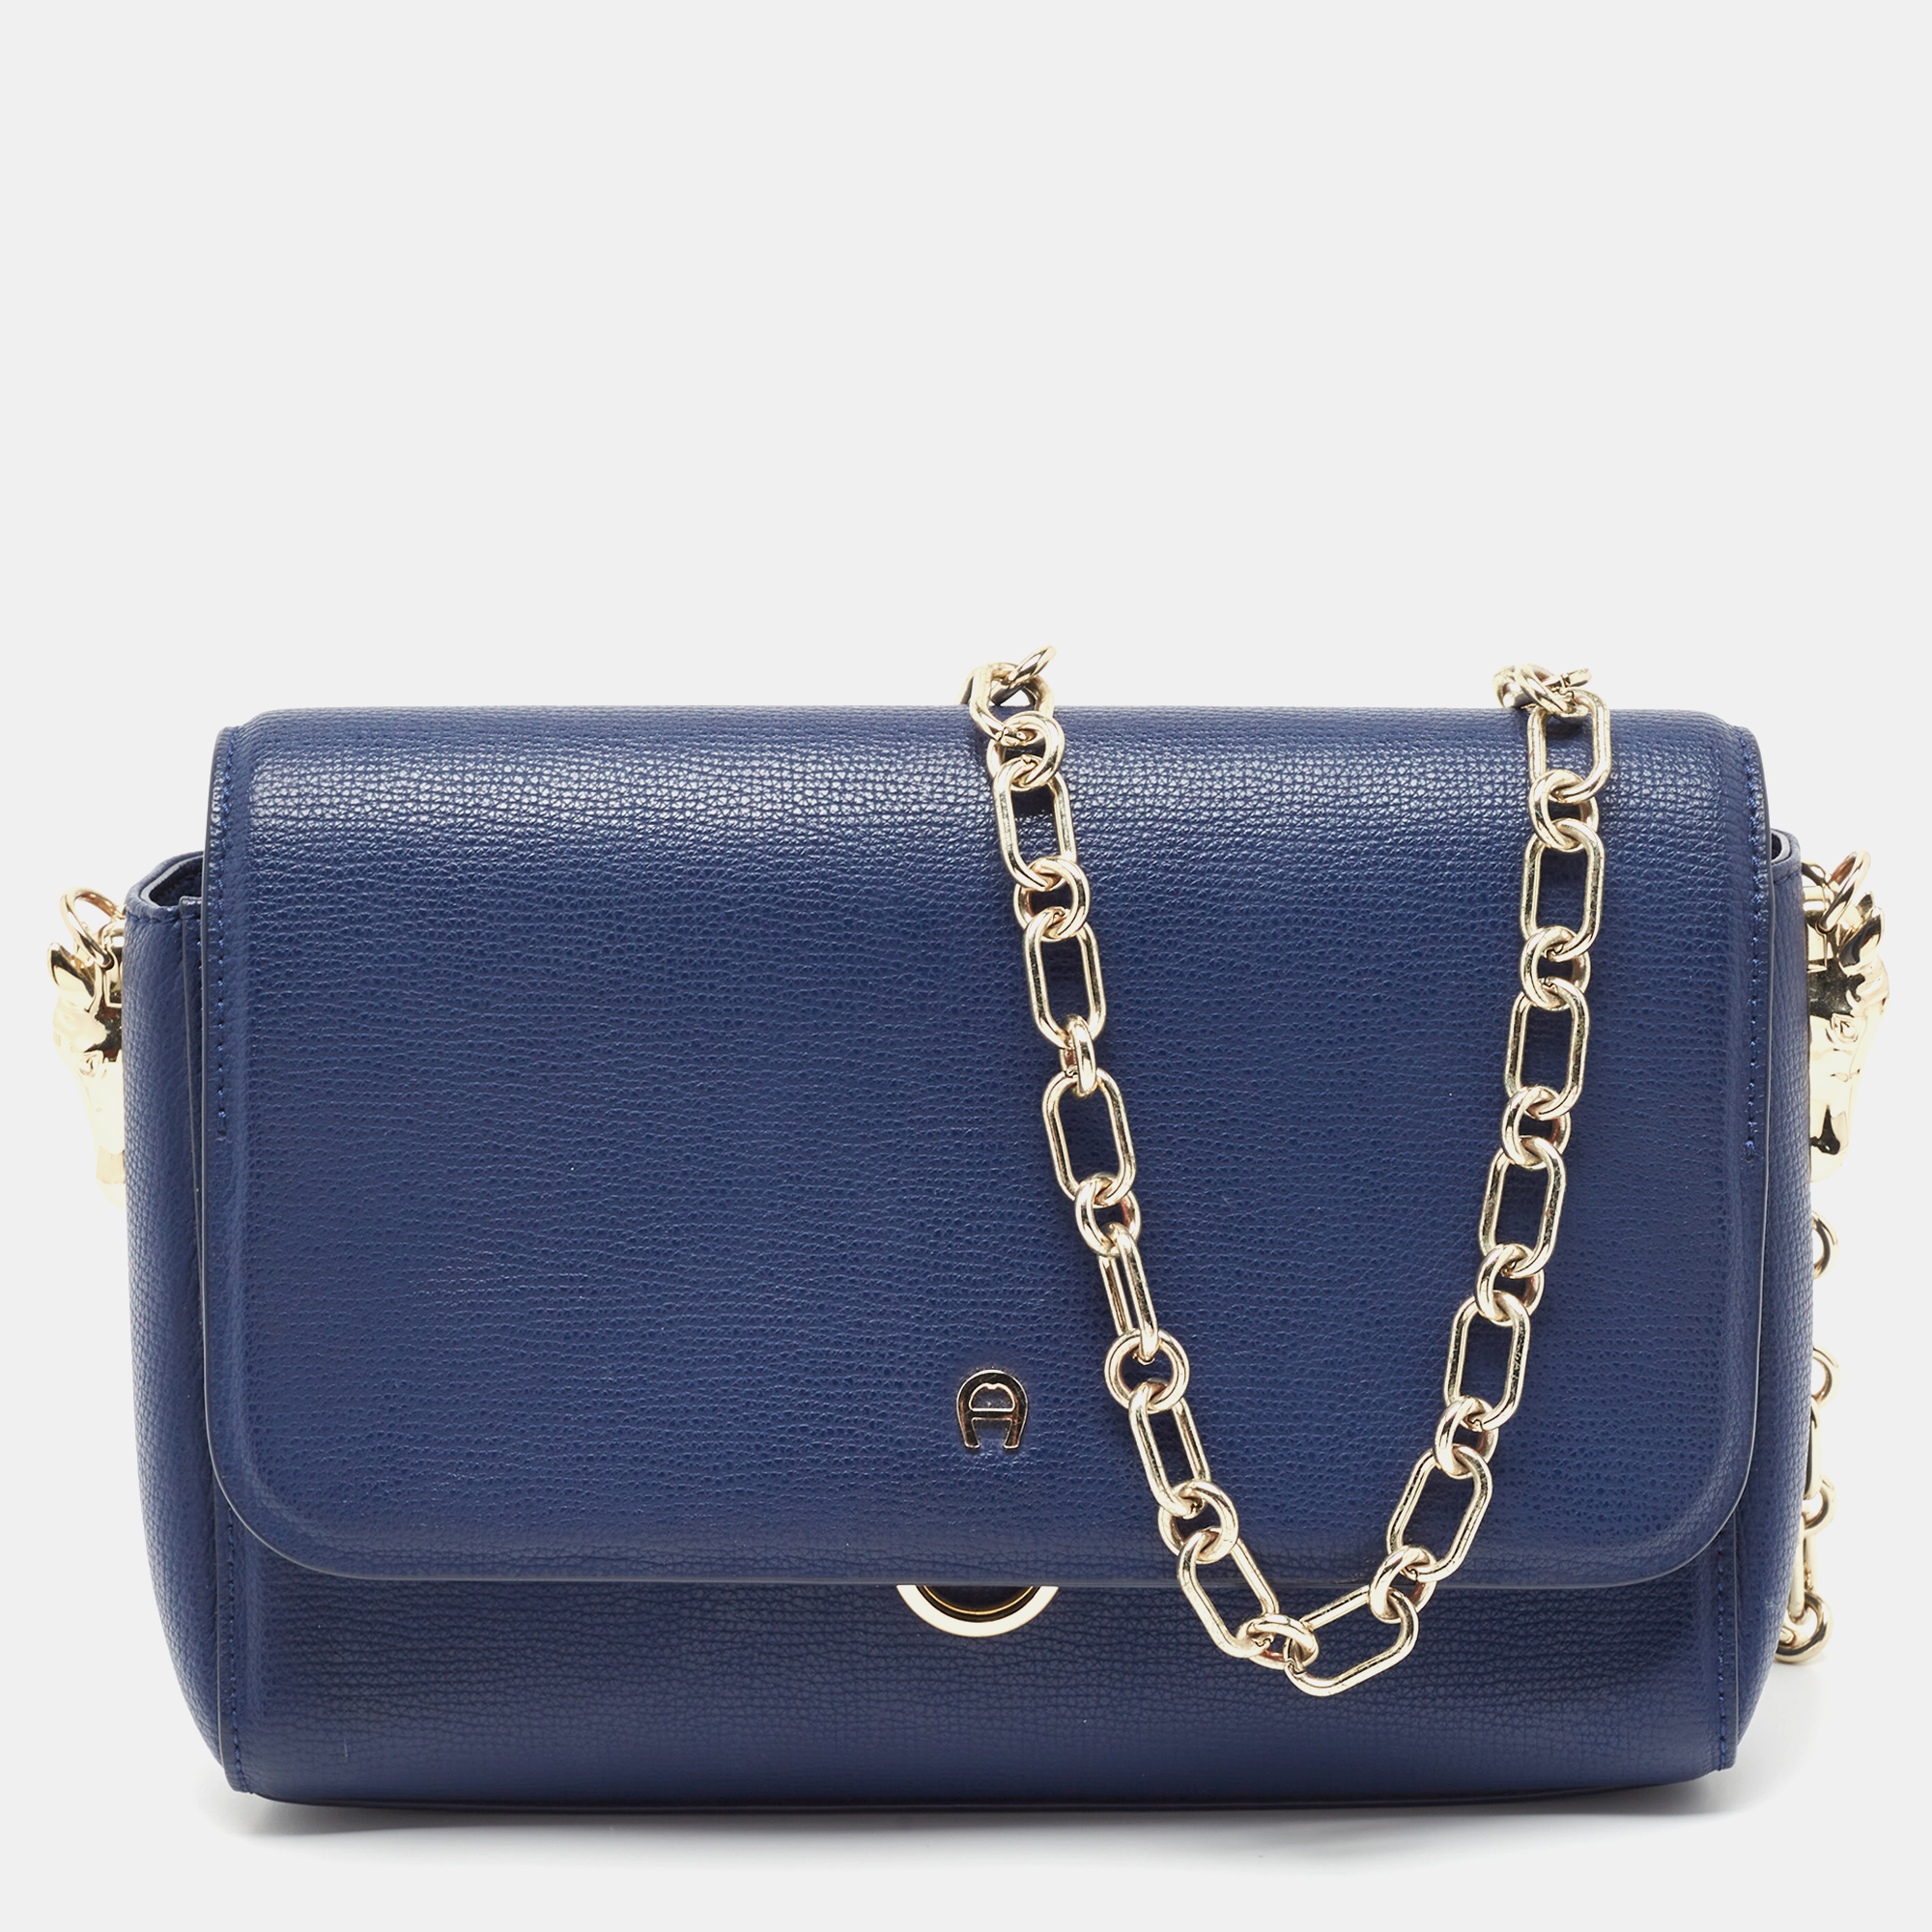 Pre-owned Aigner Navy Blue Leather Flap Chain Shoulder Bag